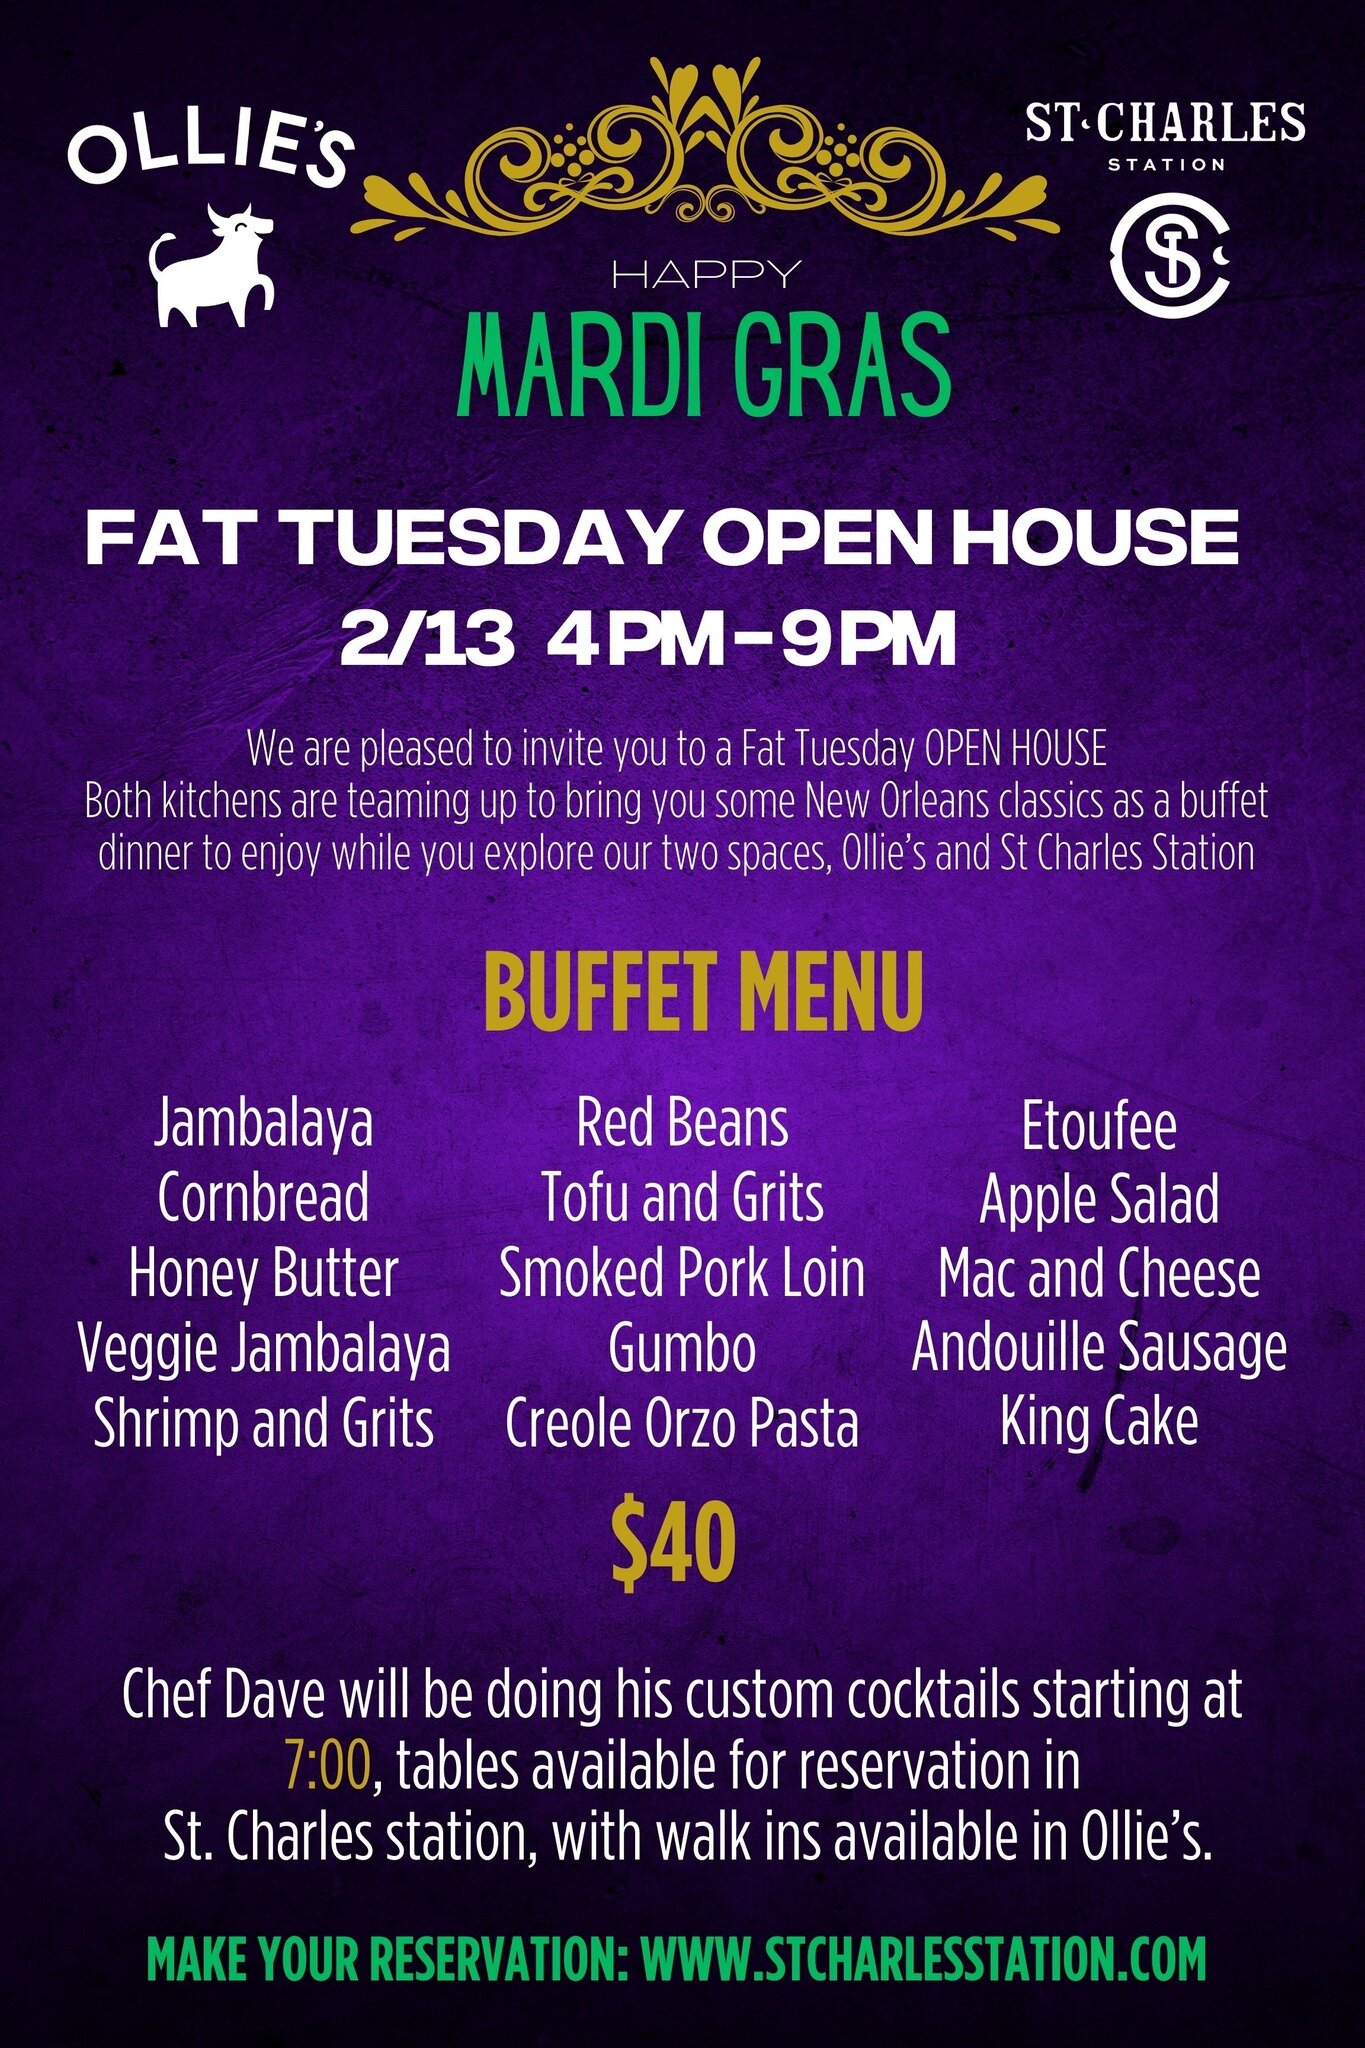 Happy Fat Tuesday! 
Tonights the night! 
Come on in for a delicious meal celebrating some New Orleans classics.
Make a reservation at stcharlesstation.com or just come on in to Ollie's.